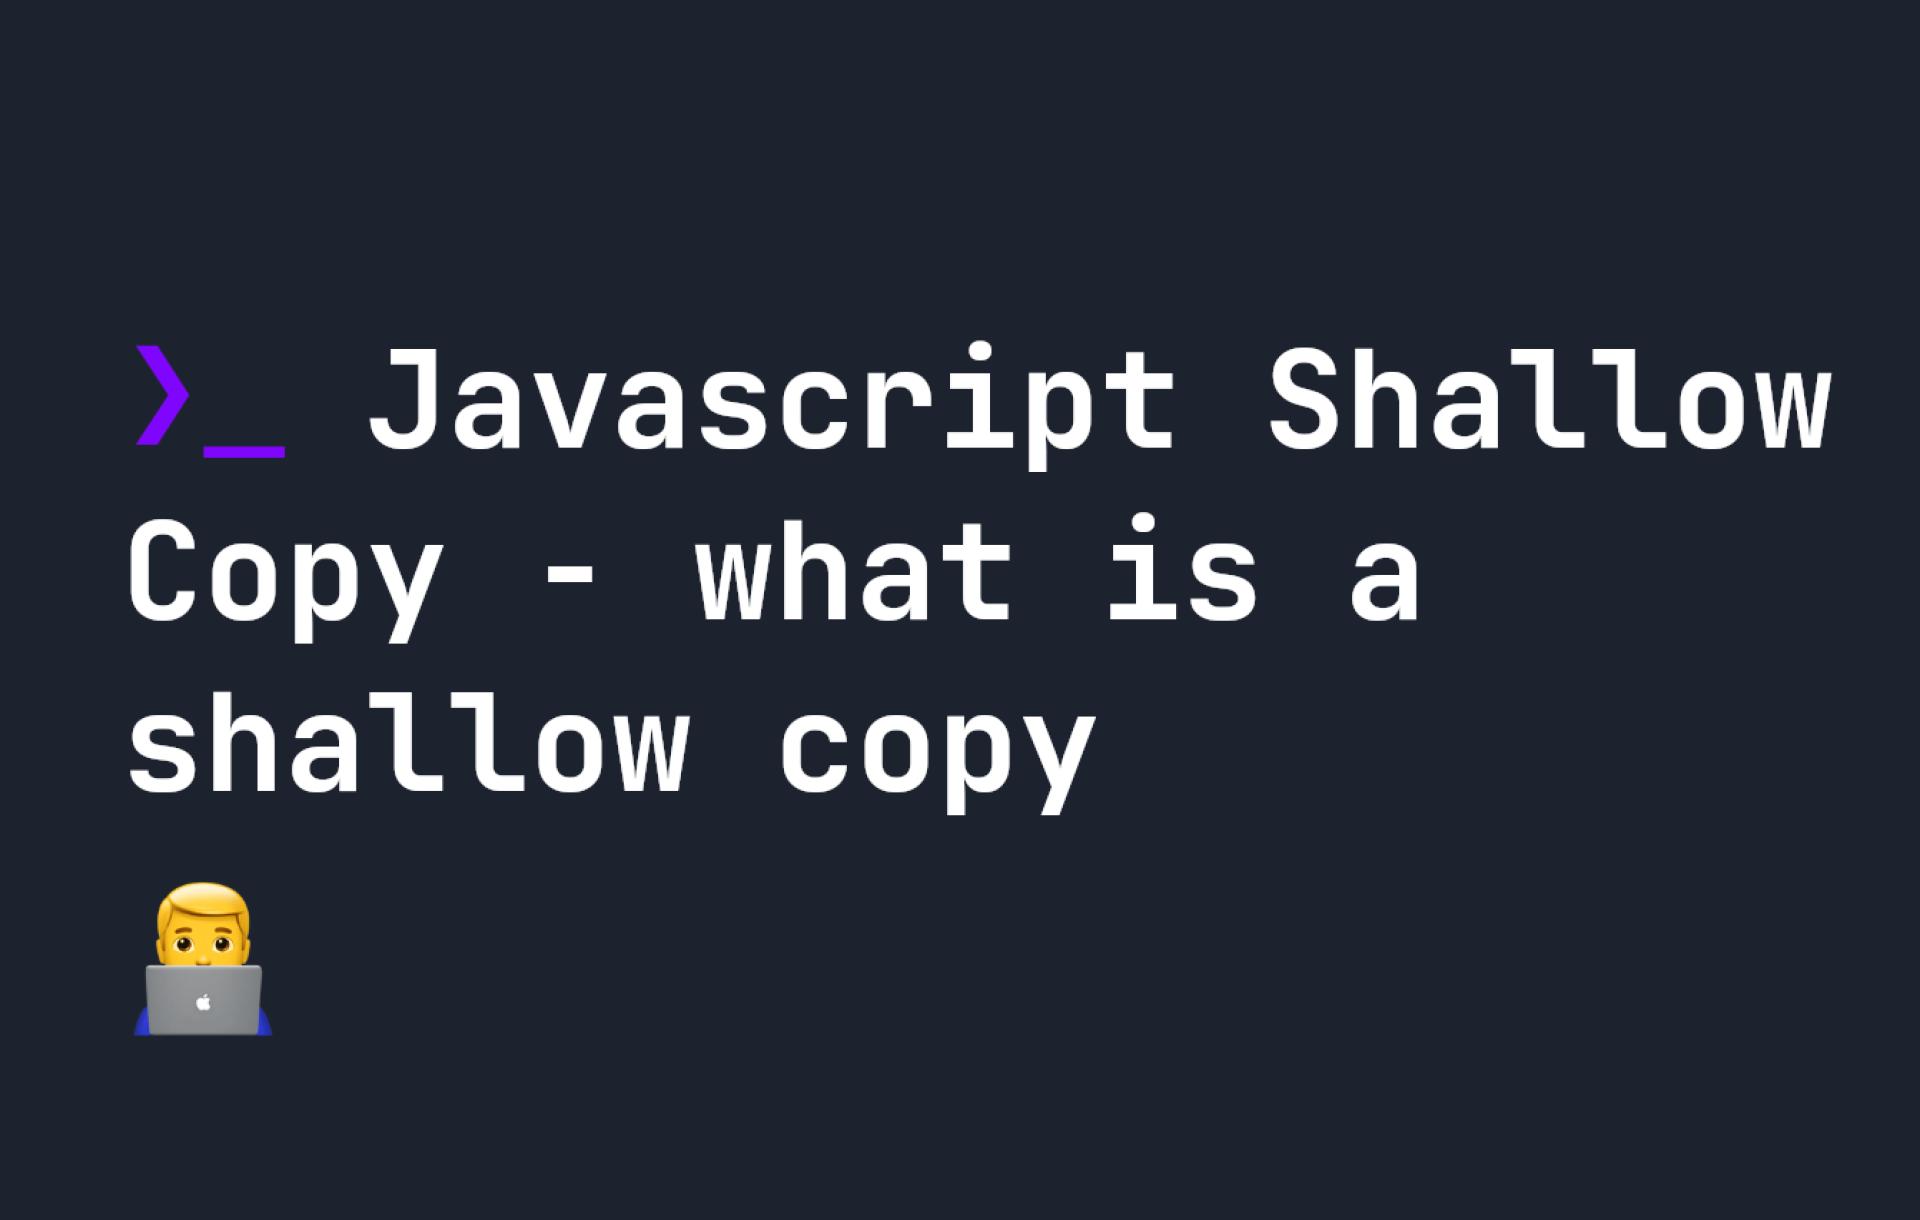 Javascript Shallow Copy - what is a Shallow Copy?